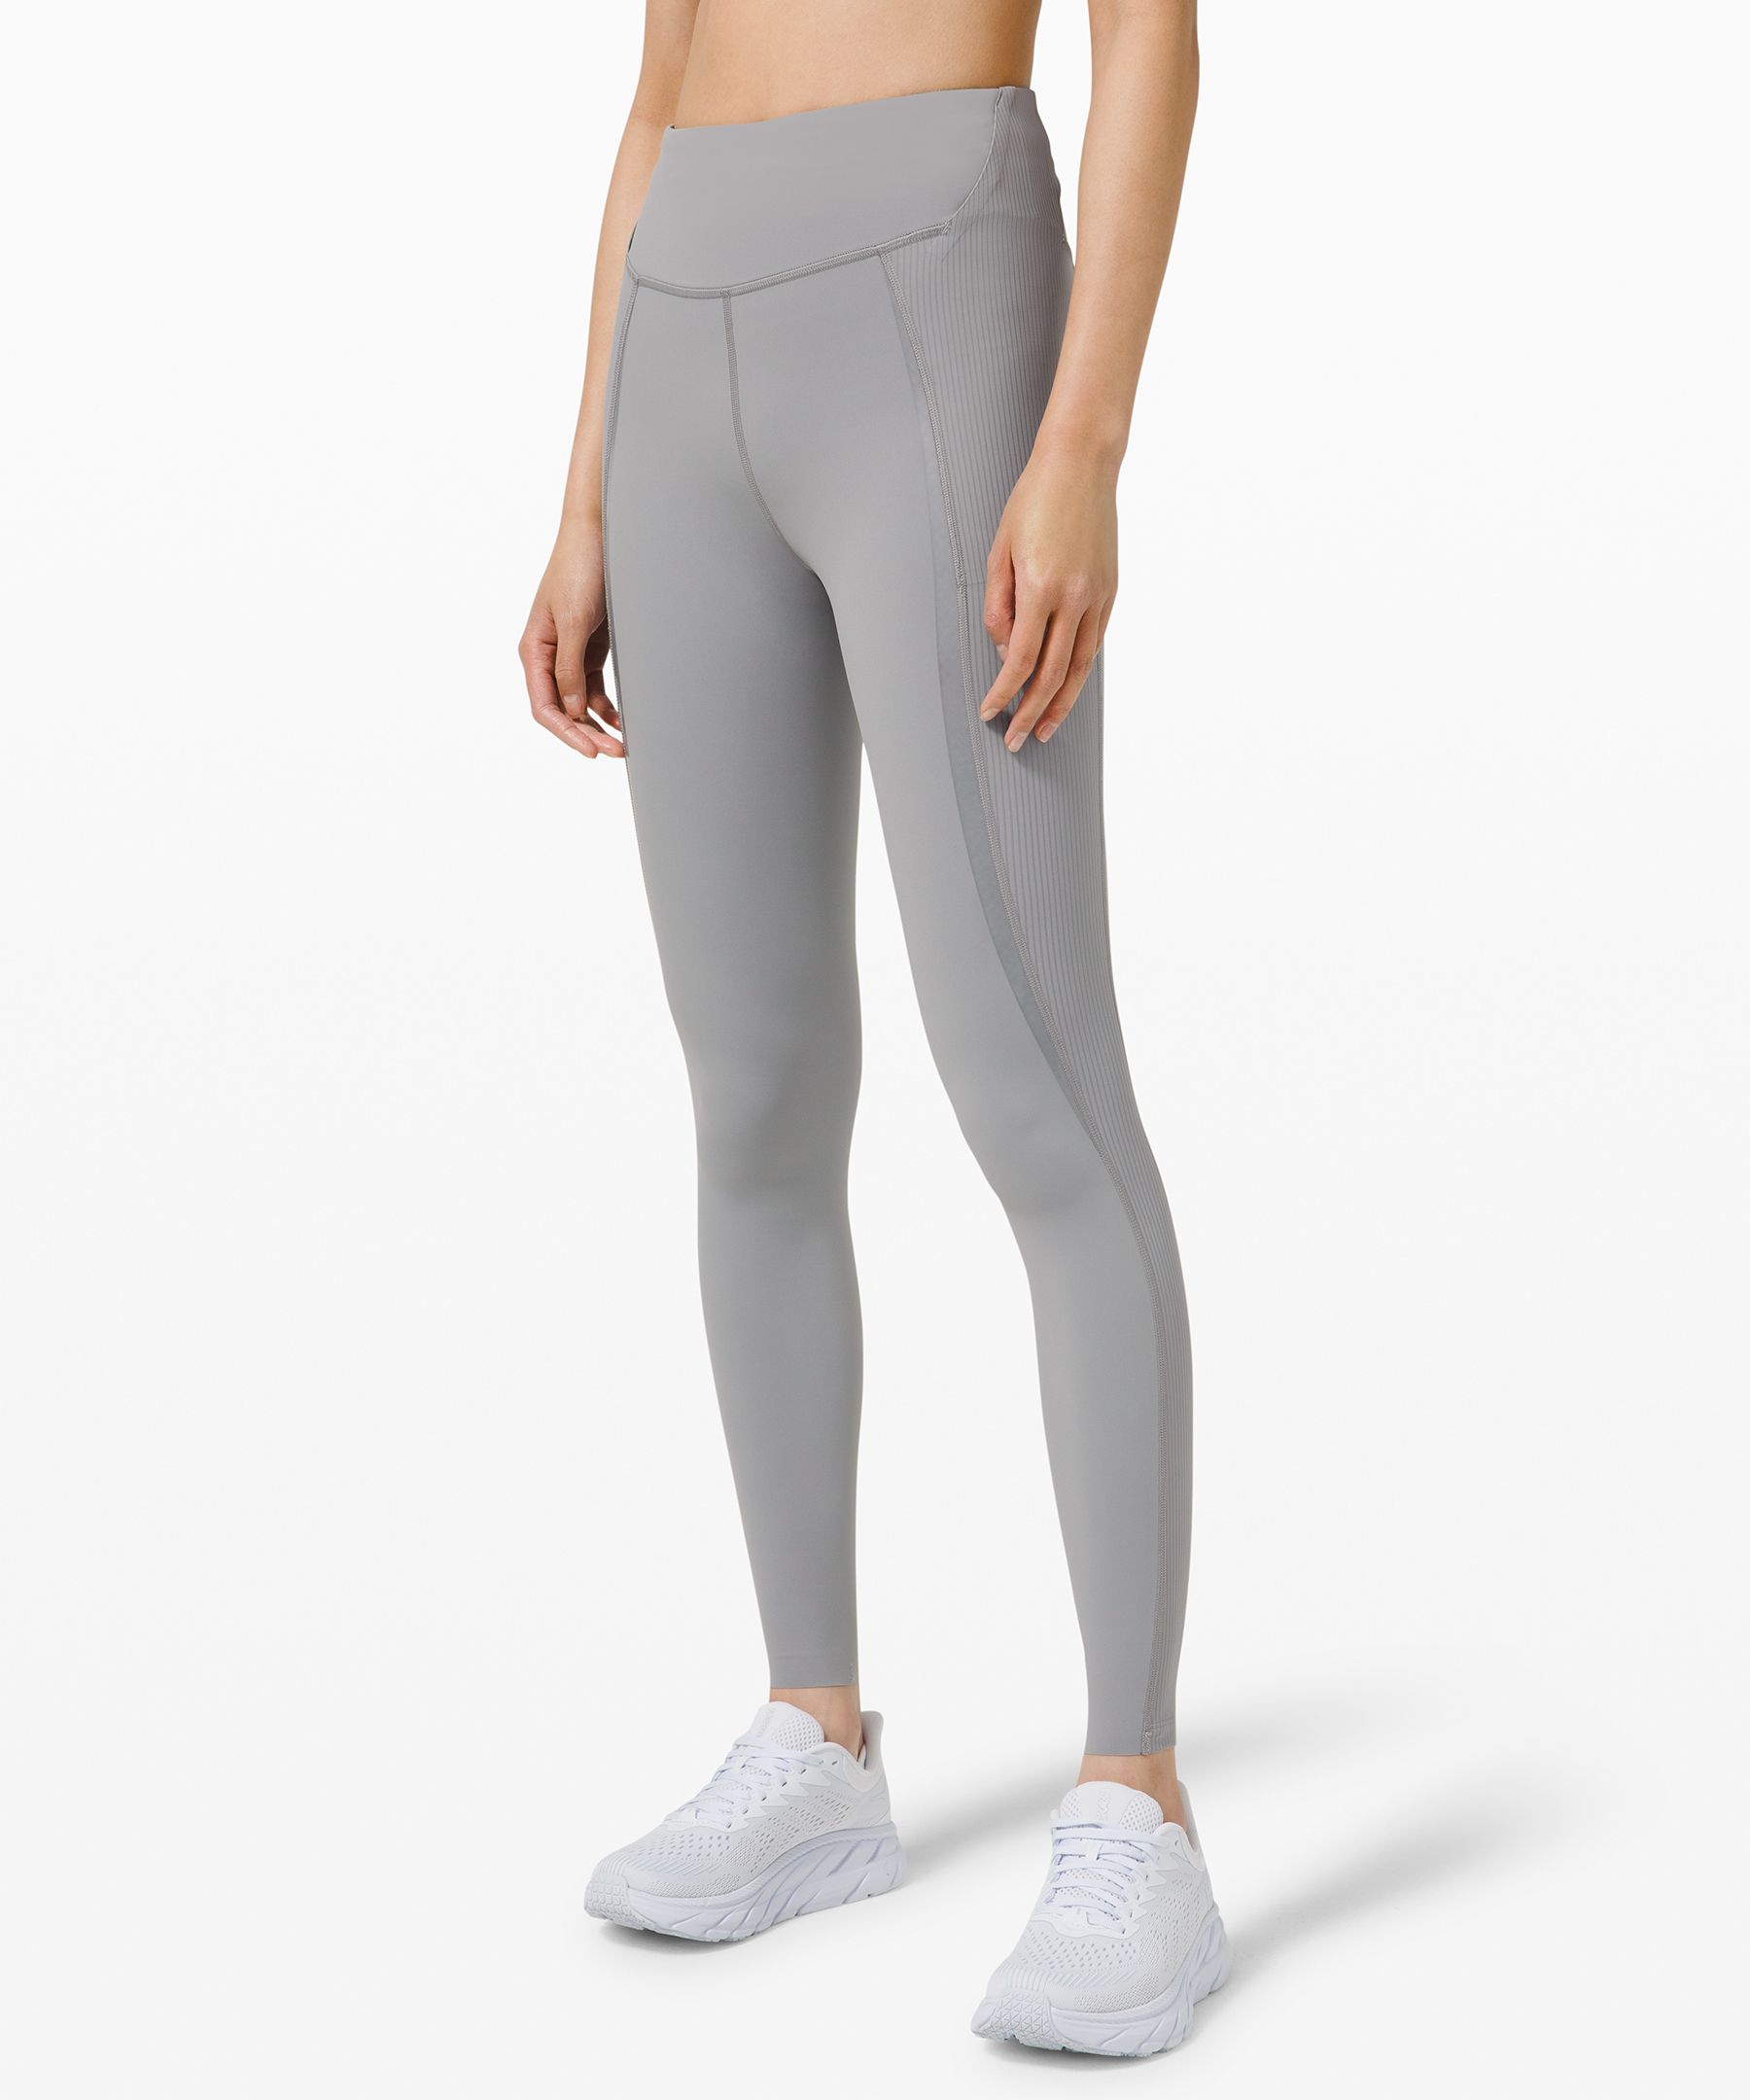 Women's Active High Rise Athletic Leggings Featuring Side Pockets. (6 pack)  - 3.5 High Rise Waistband - Two Side Pockets - Designed for Training -  Sweat-Wicking - 4-way Stretch - Breathable 